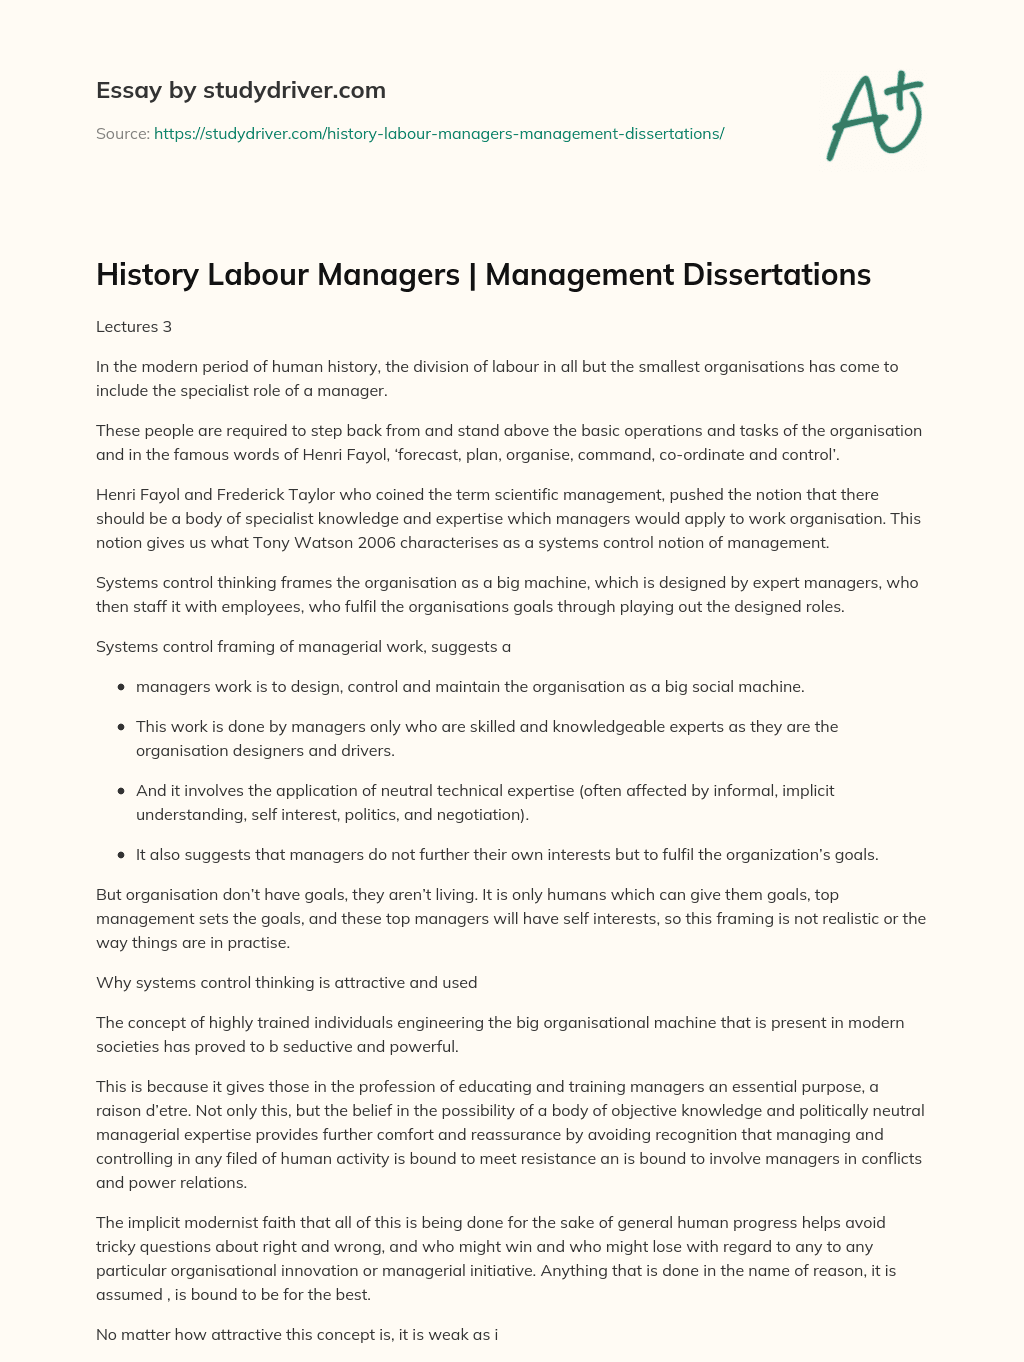 History Labour Managers | Management Dissertations essay